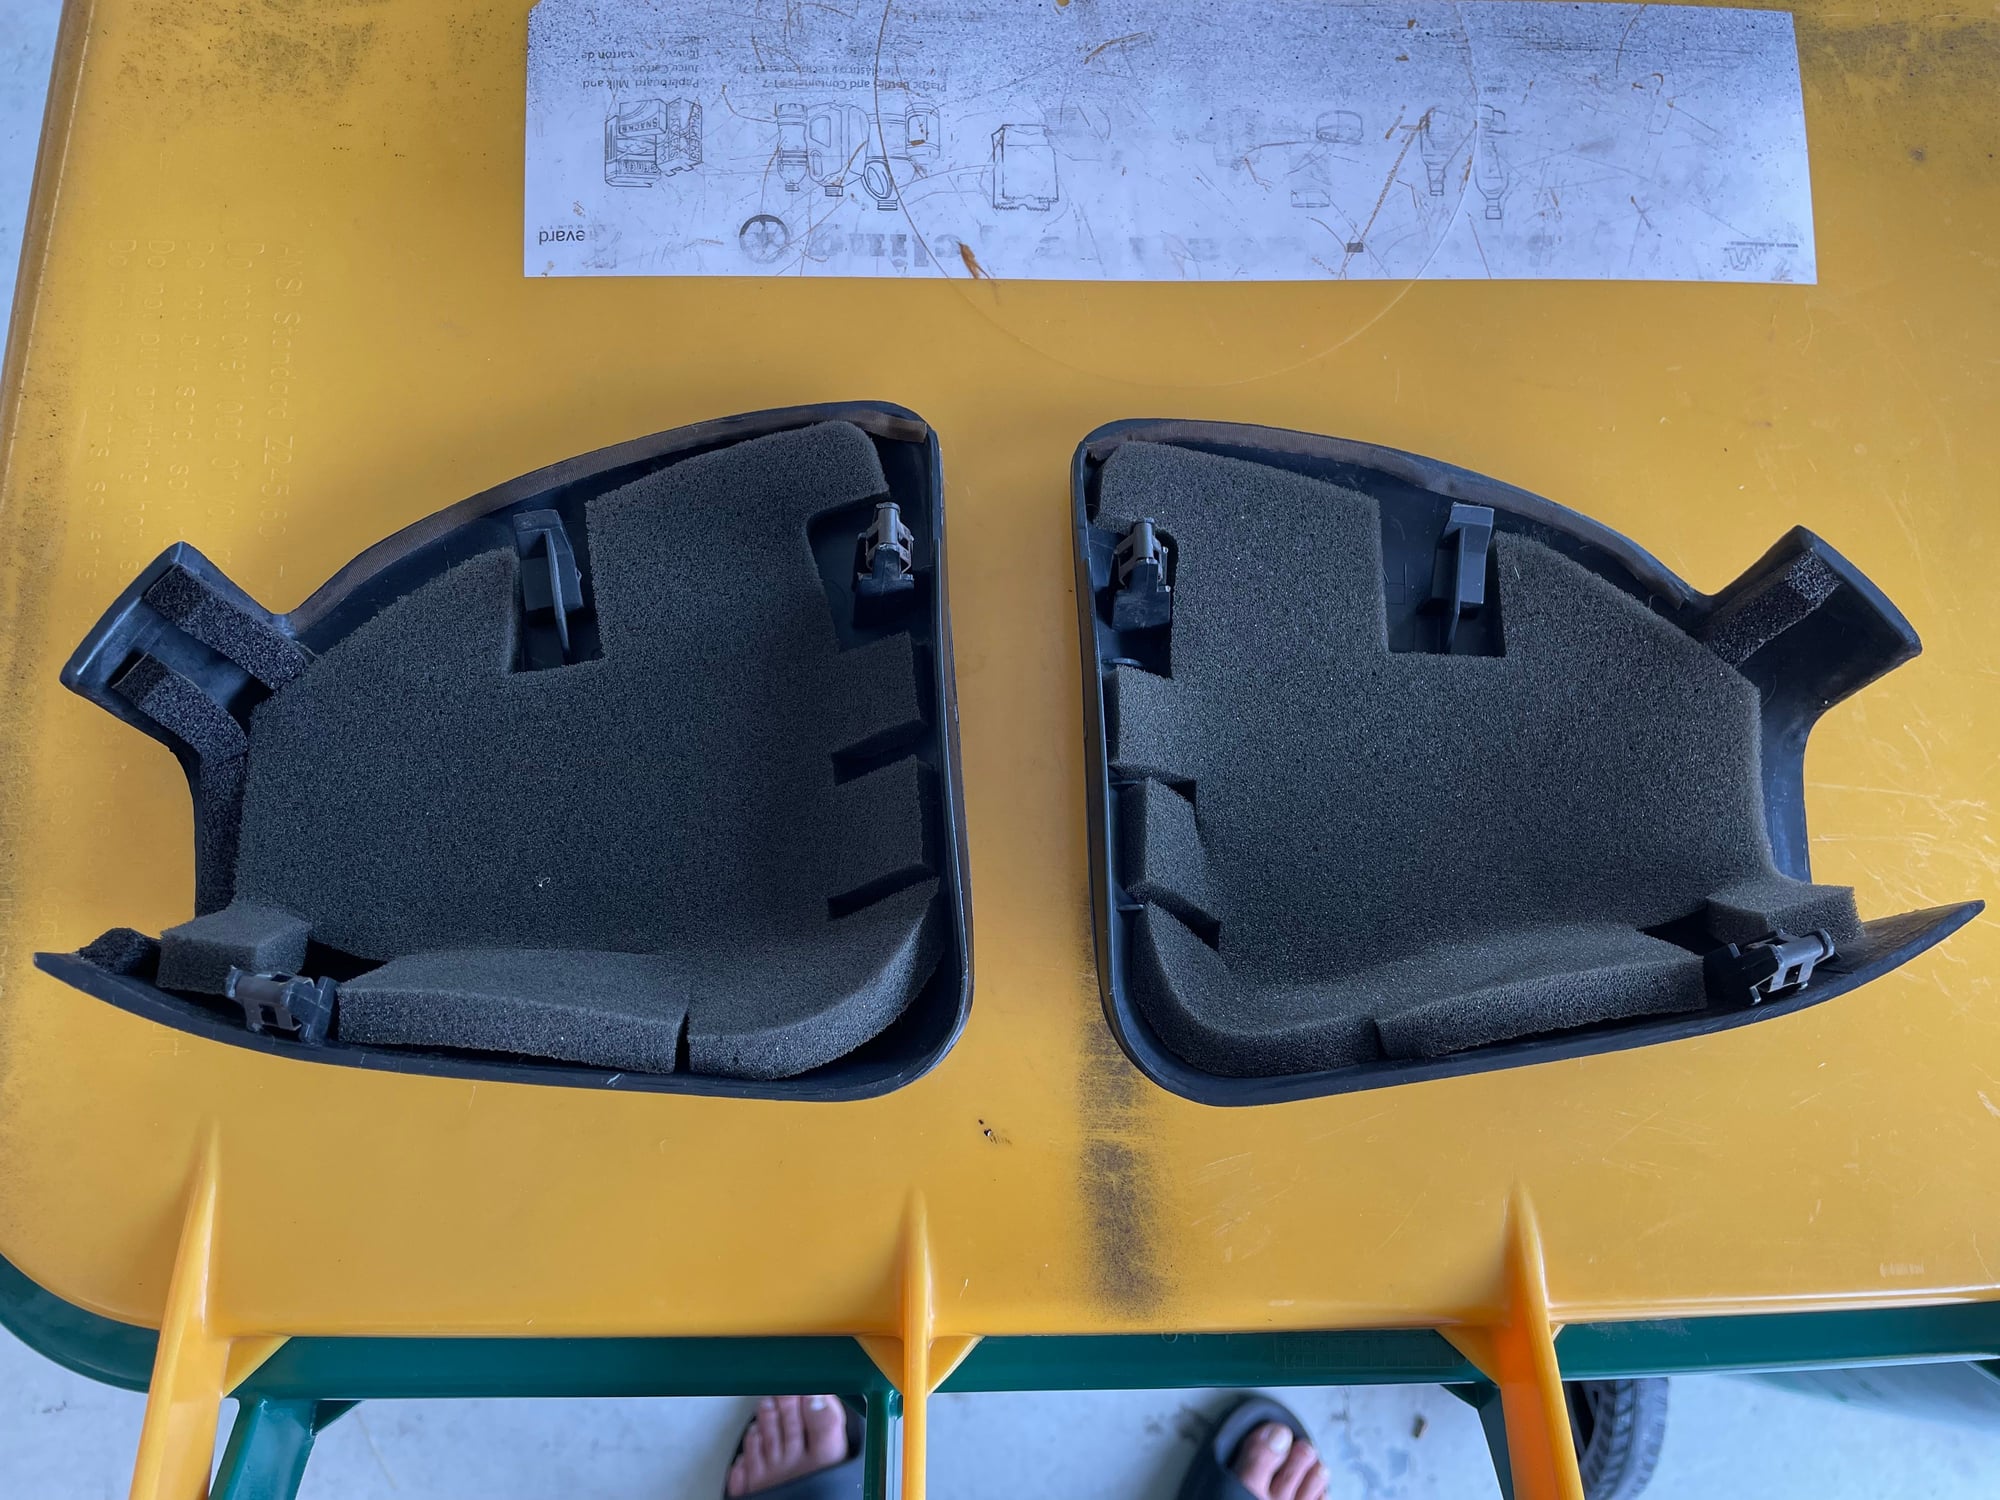 Interior/Upholstery - FD shock tower caps - black $75 shipped - Used - 1993 to 1995 Mazda RX-7 - Melbourne, FL 32940, United States